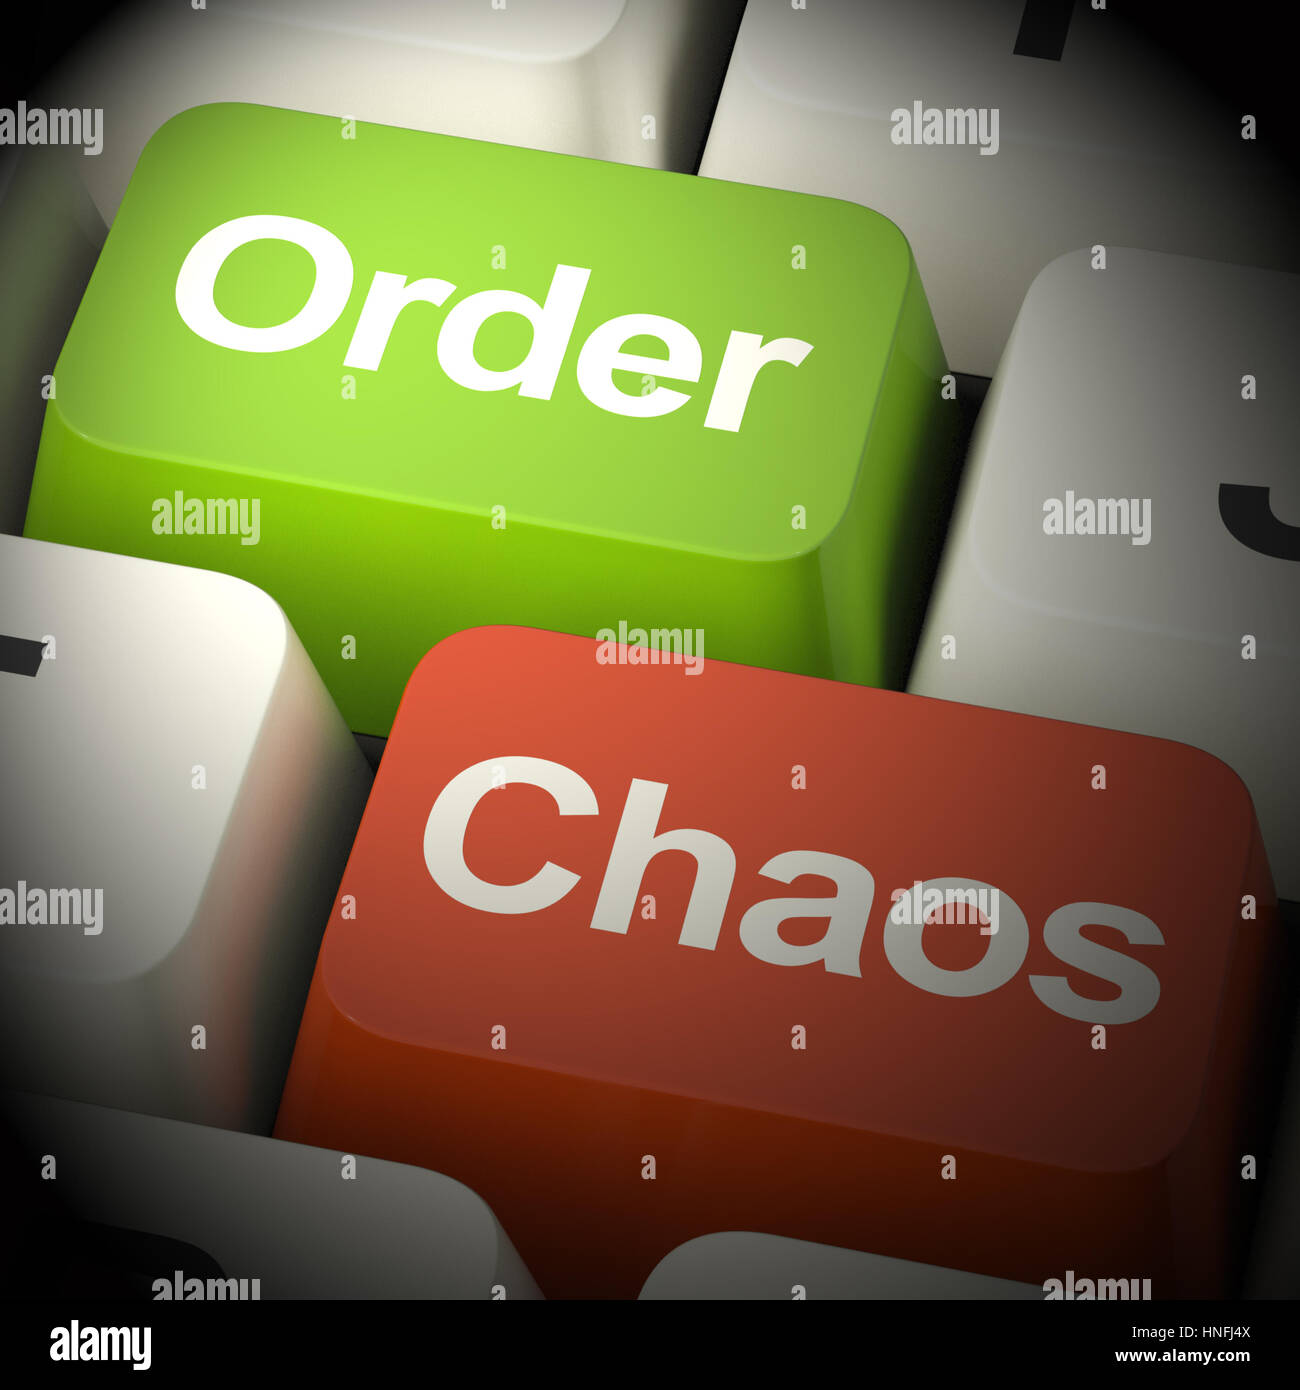 Order Or Chaos Keys Shows Either Organized Or Unorganized 3d Rendering Stock Photo